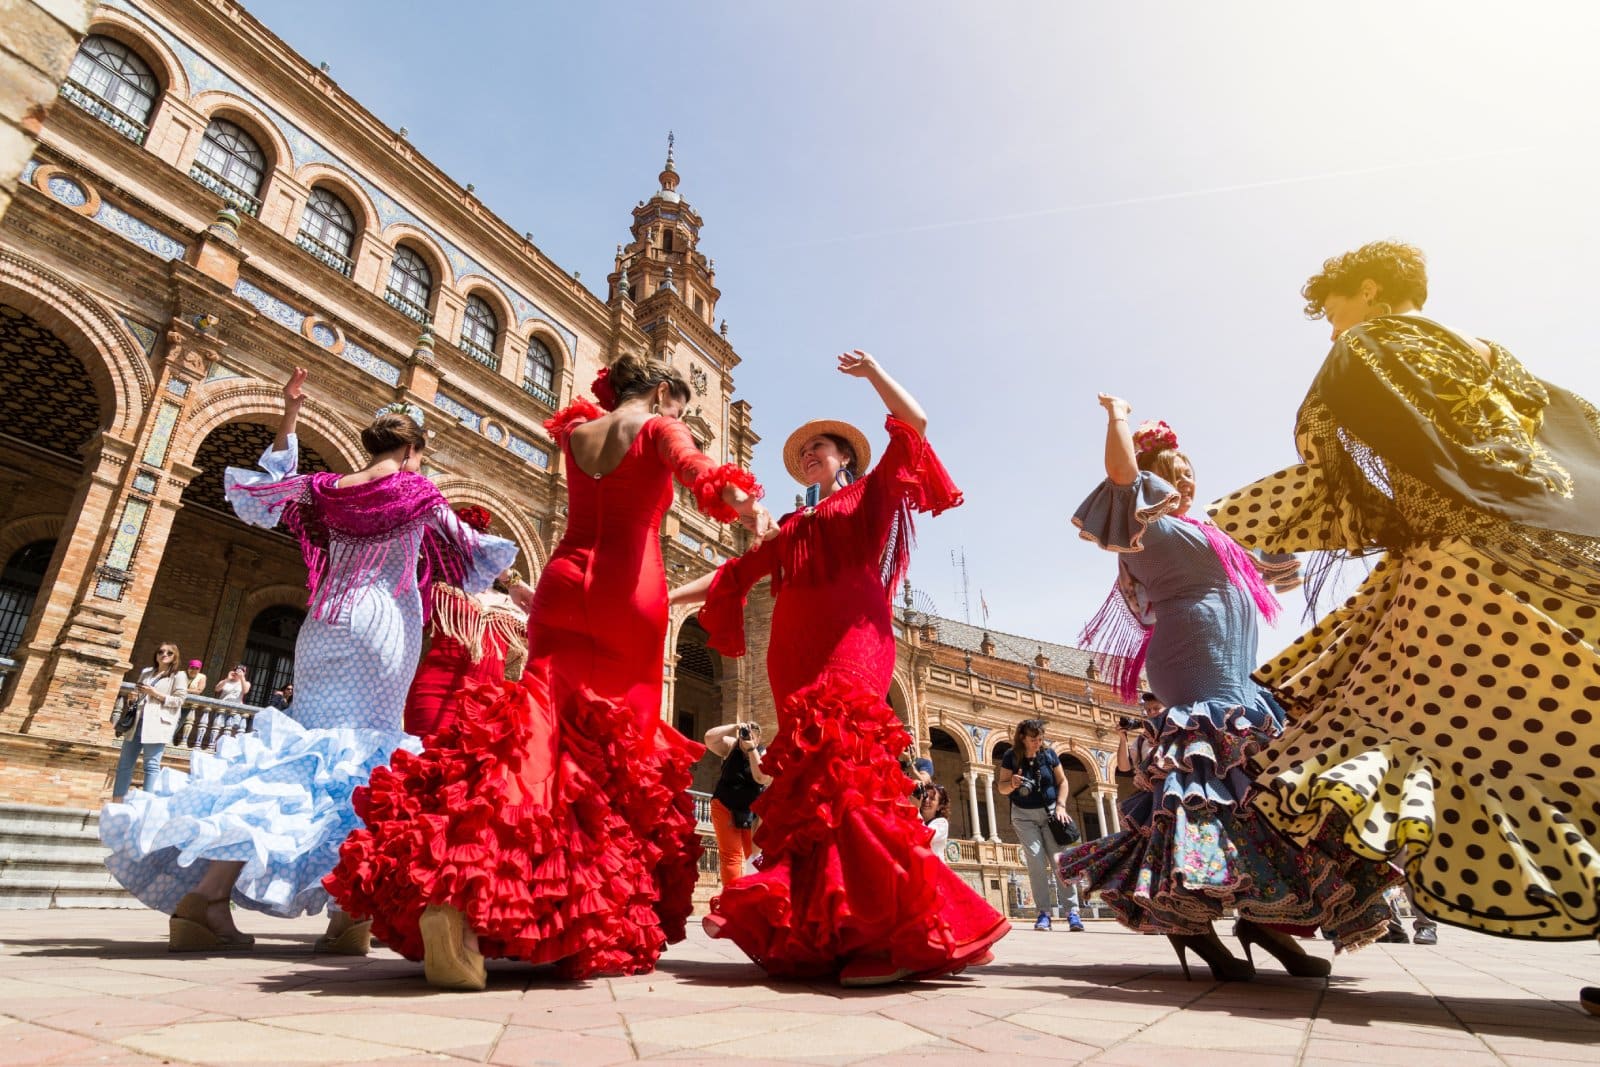 Image Credit: Shutterstock / leonov.o <p>You might pick up salsa dancing in Colombia, kickboxing in Thailand, or just the fine art of people-watching from a Parisian café.</p>